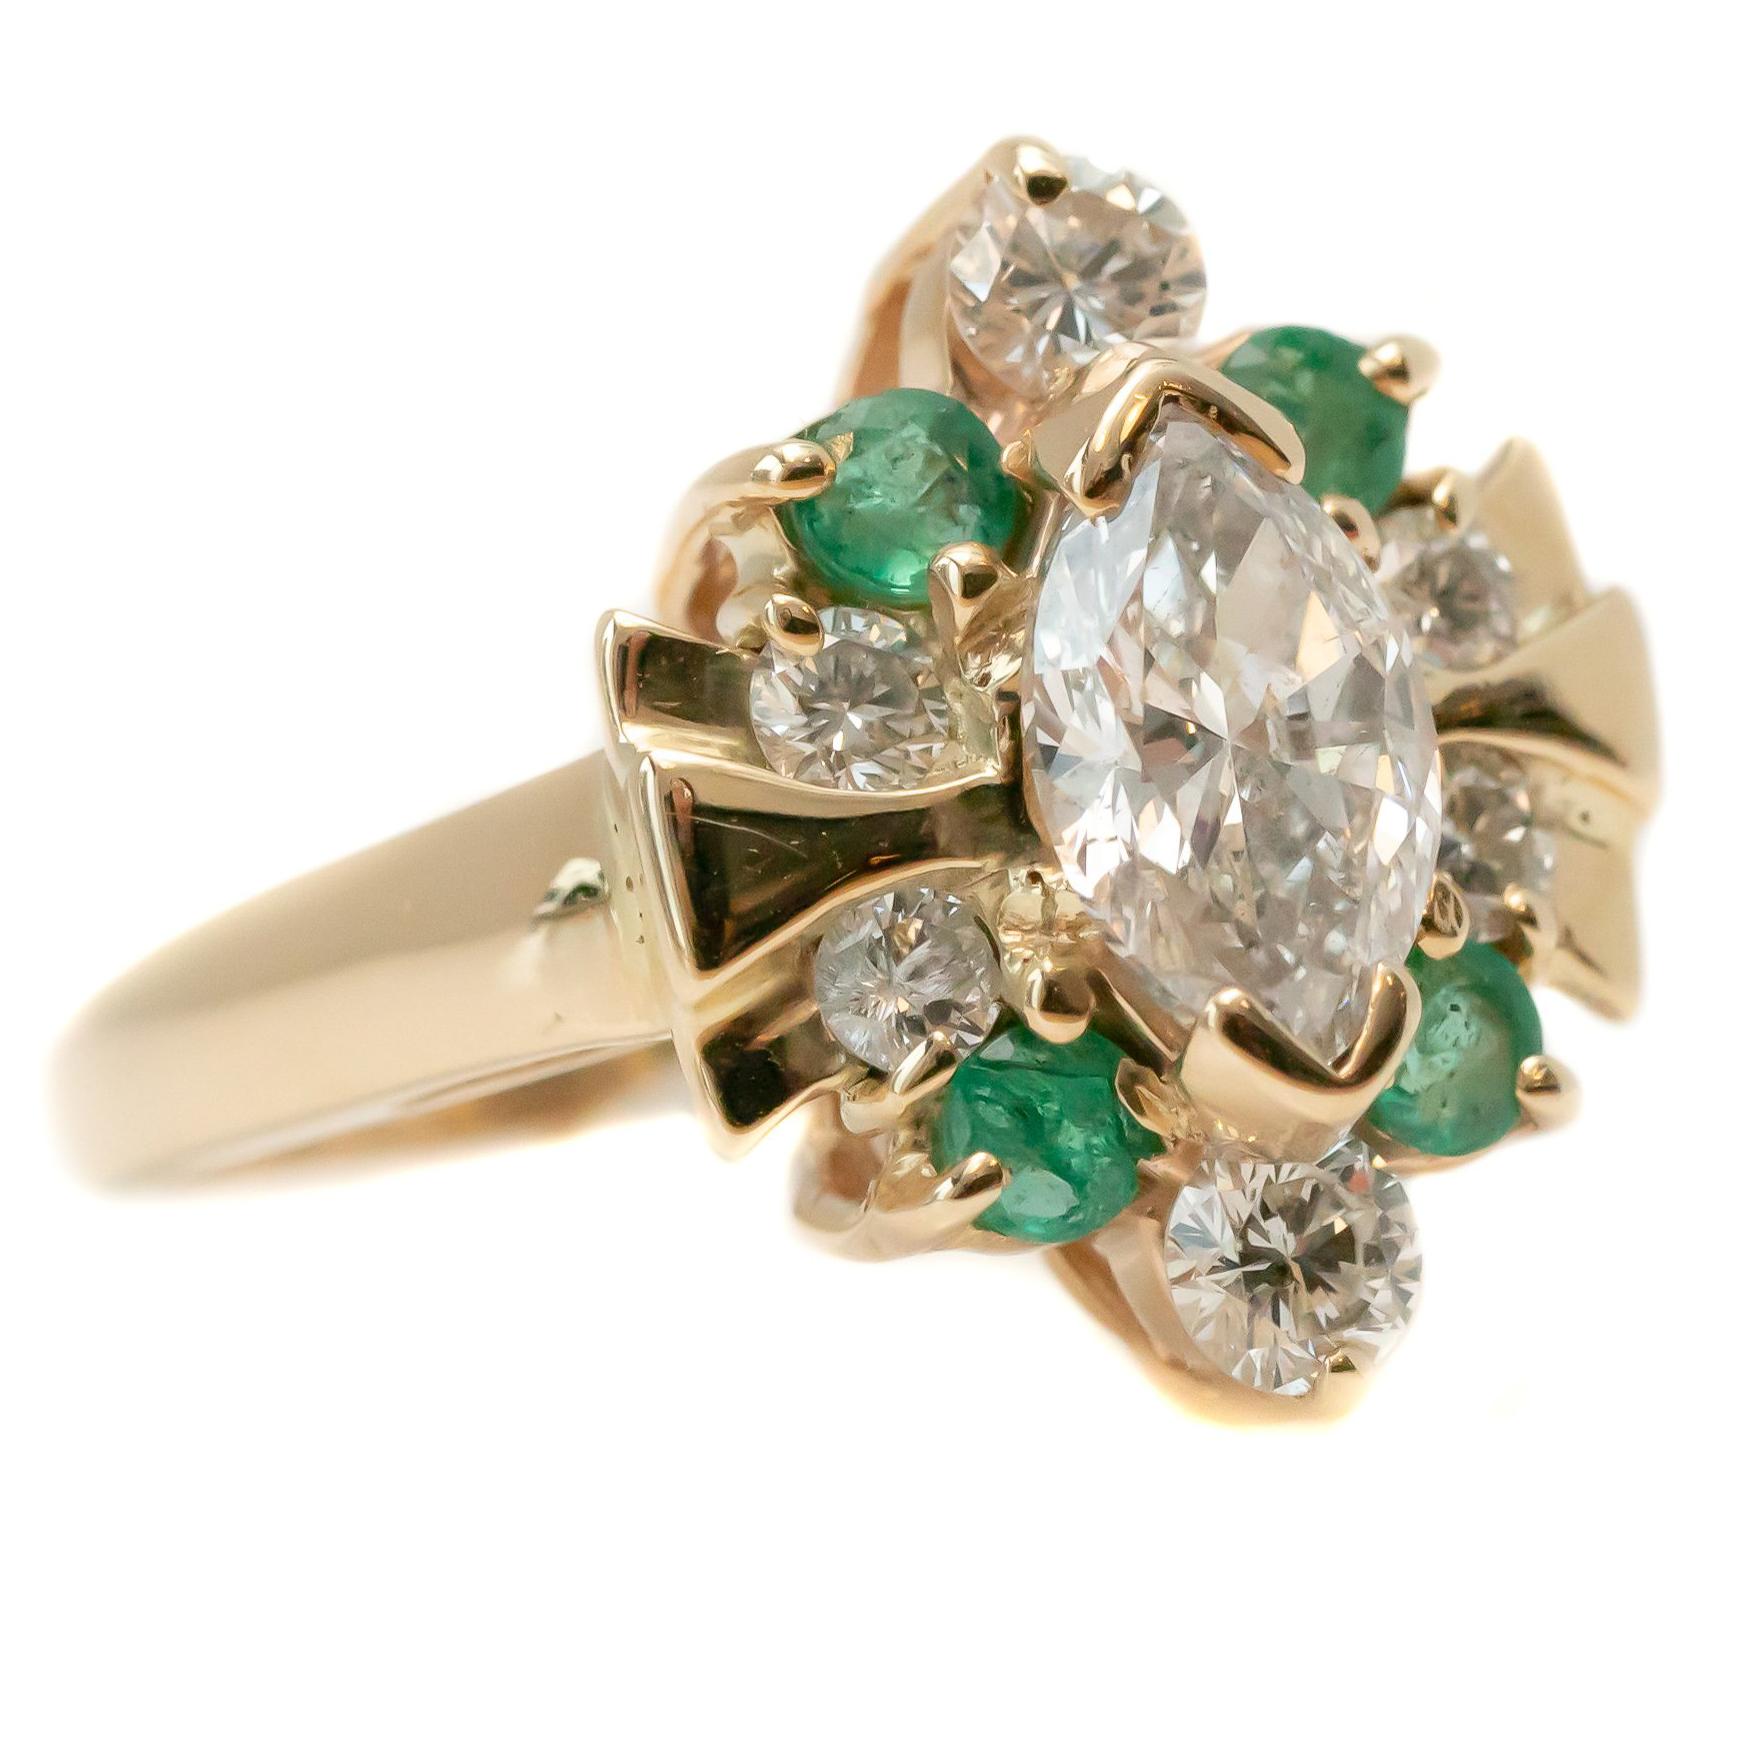 1950s 1.5 Carat Total Diamond, Emerald and Yellow Gold Marquise Cocktail Ring